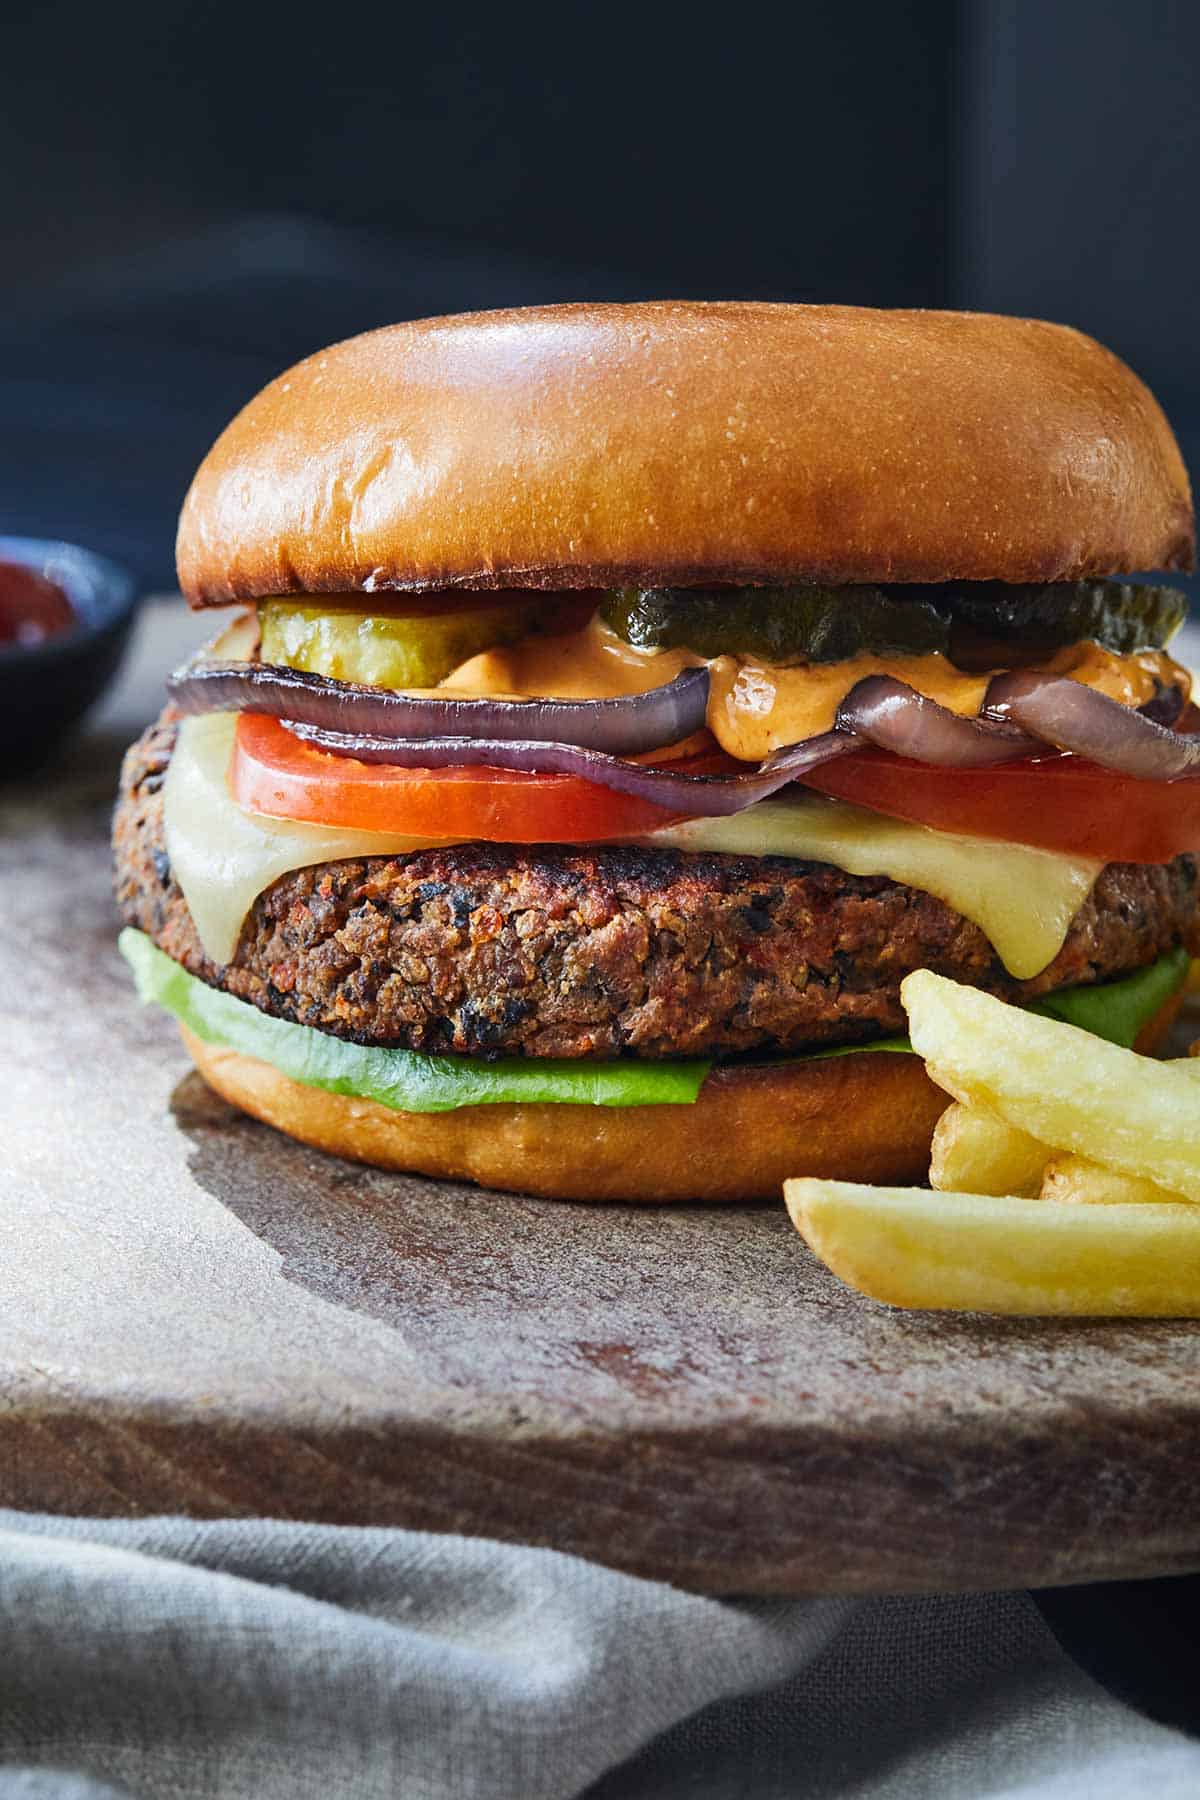 A black bean burger on a wooden serving board with fries.